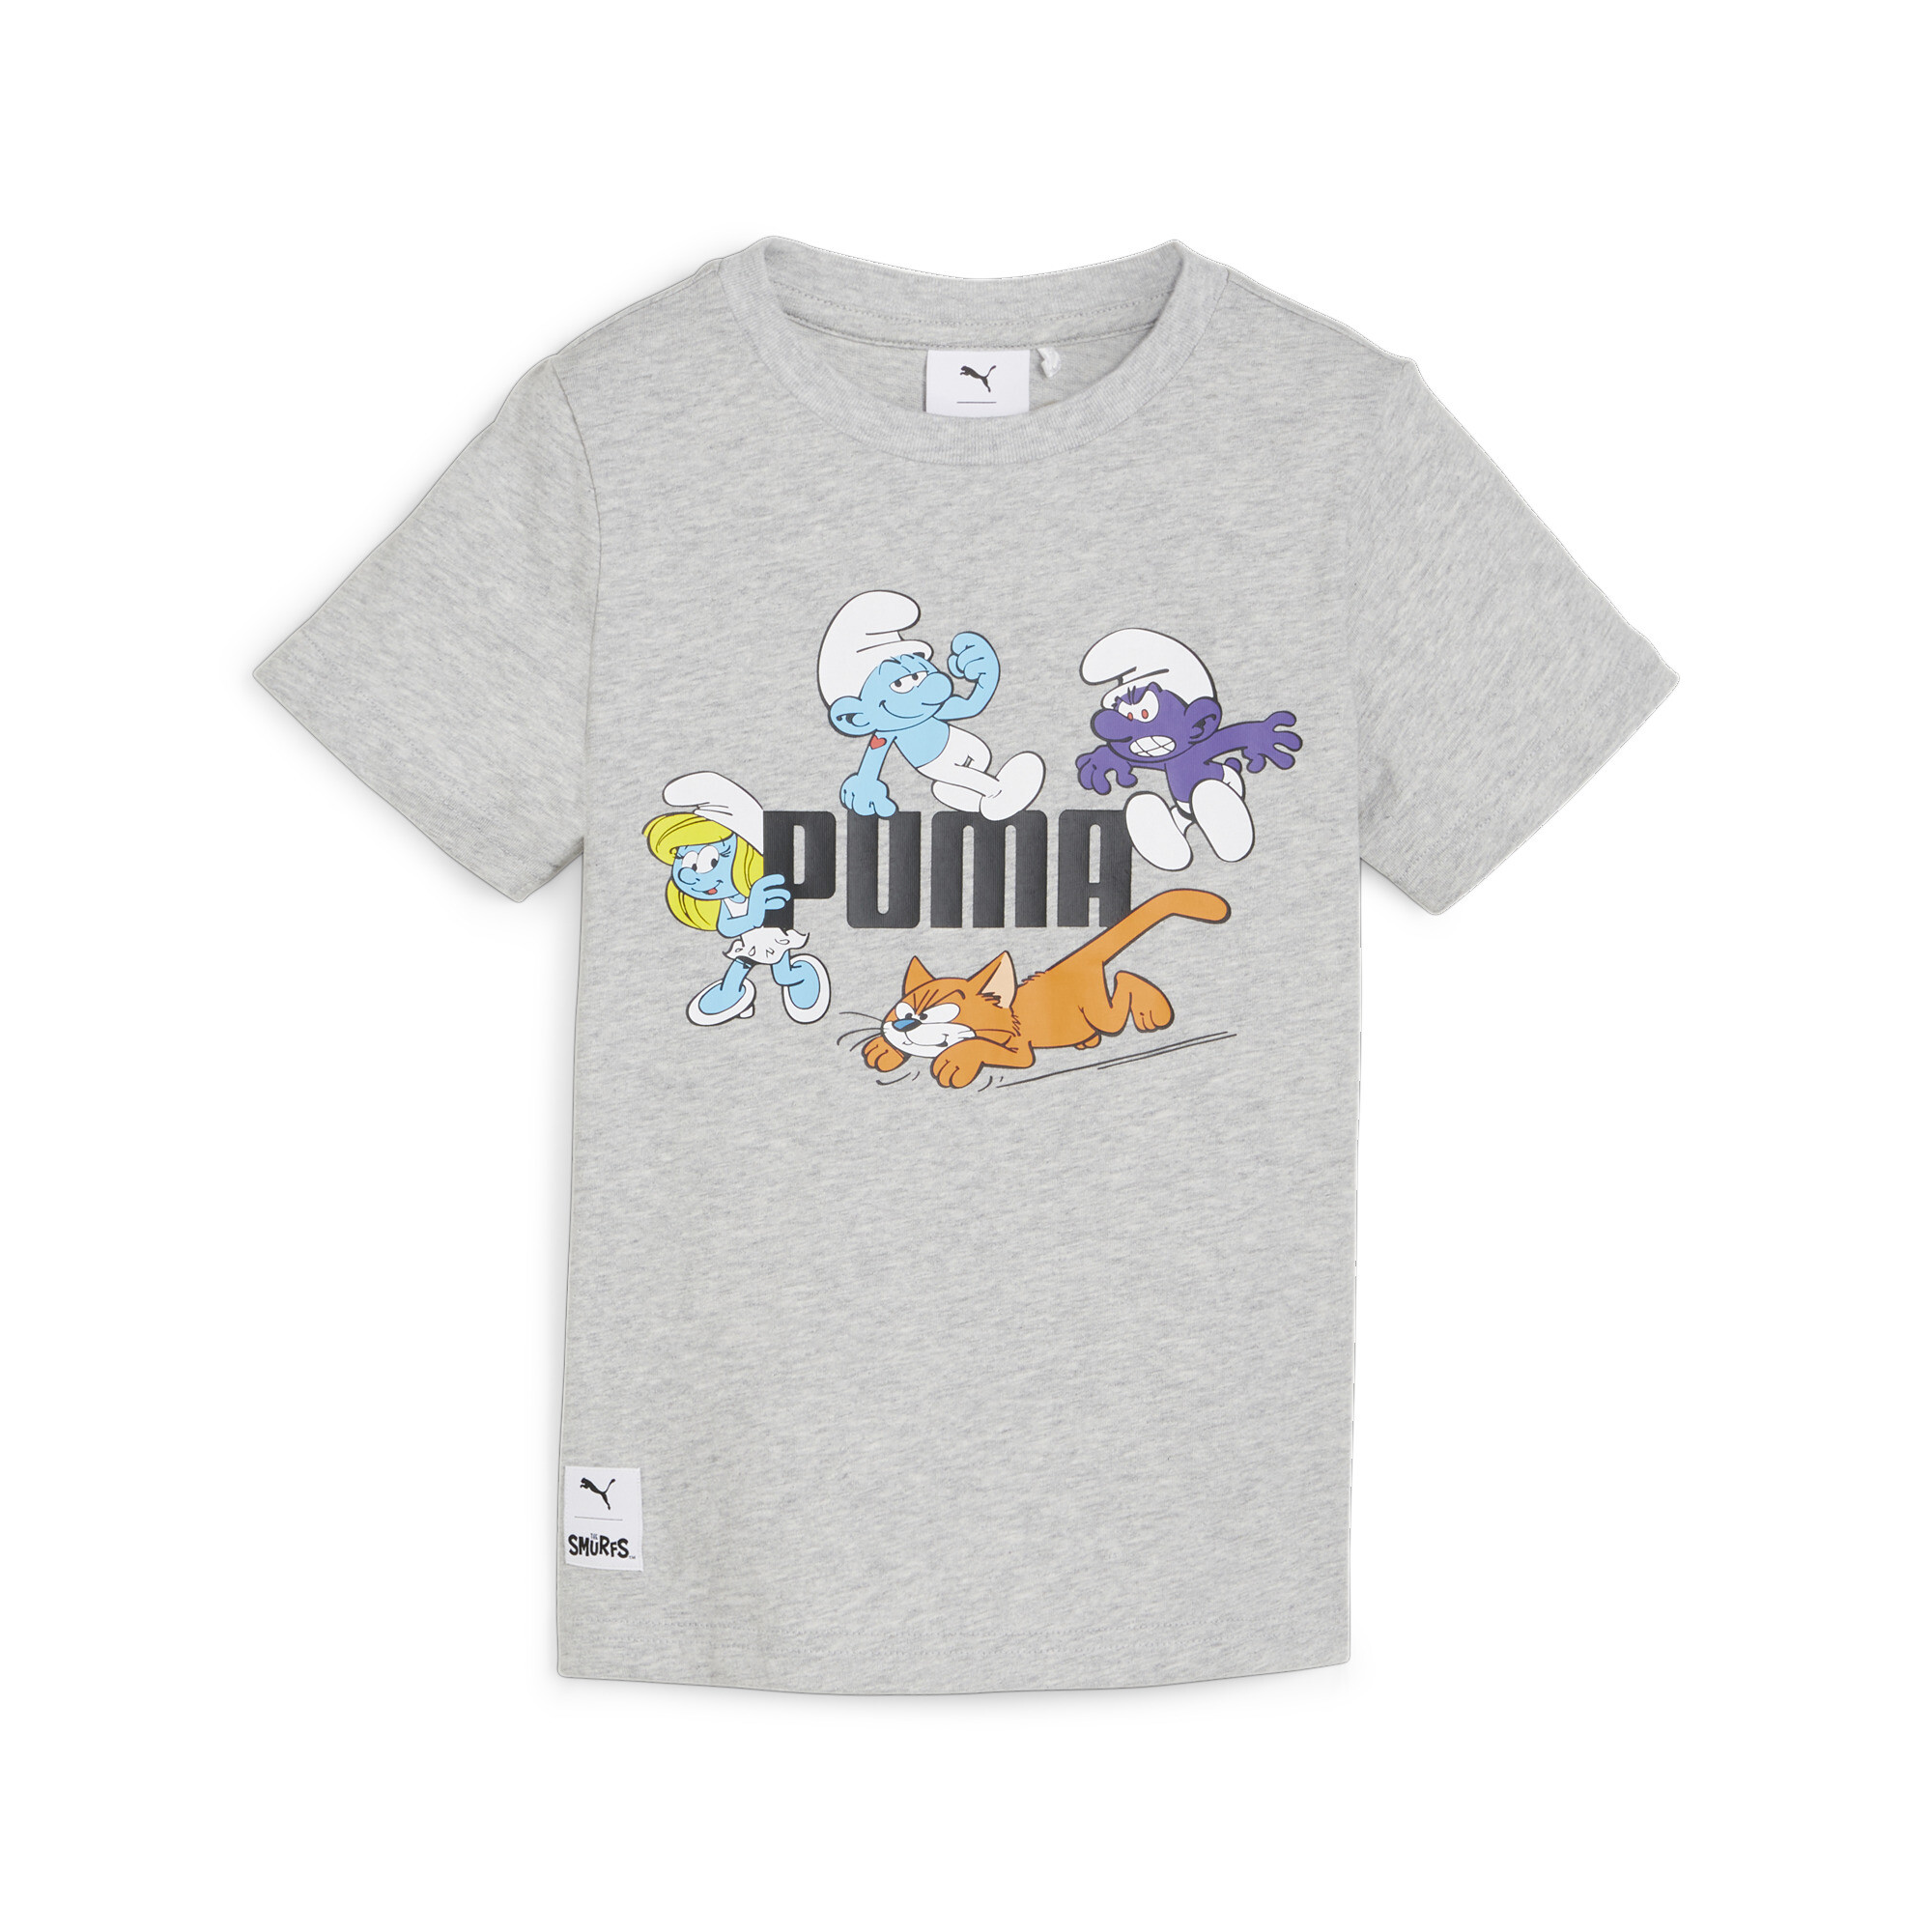 PUMA X THE SMURFS T-Shirt In Heather, Size 1-2 Youth